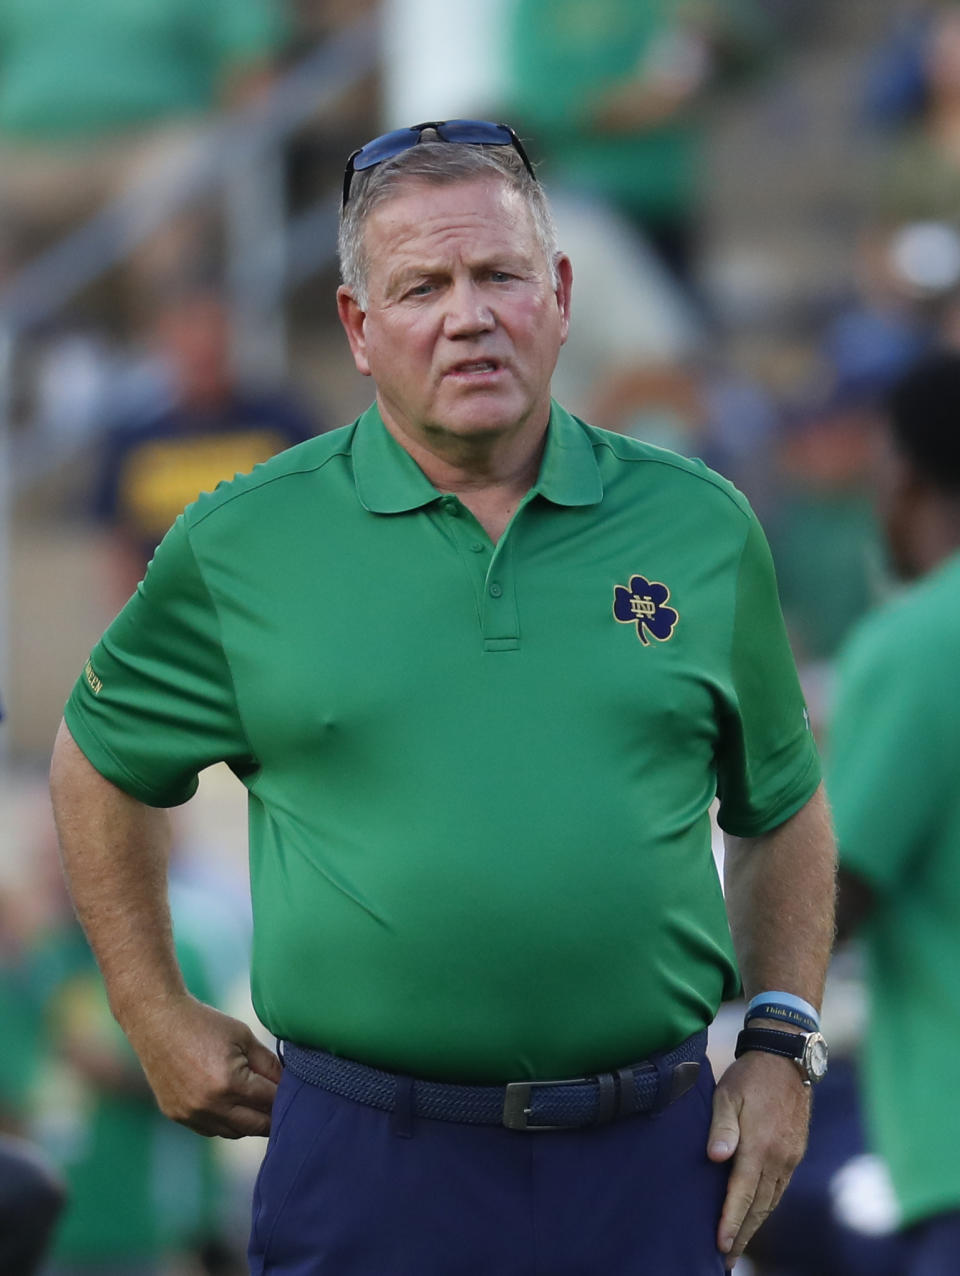 FILE - In this Saturday, Sept. 1, 2018, file photo, Notre Dame head coach Brian Kelly watches before an NCAA football game against Michigan in South Bend, Ind. For Notre Dame to book its second straight College Football Playoff appearance, it will have to run the table behind quarterback Ian Book. “When you step into being the quarterback at Notre Dame, high expectations come with it,” said head coach Brian Kelly, who has twice in nine seasons directed teams to 12-0 regular seasons only to come up short of delivering the school’s first national title since 1988. (AP Photo/Paul Sancya, File)